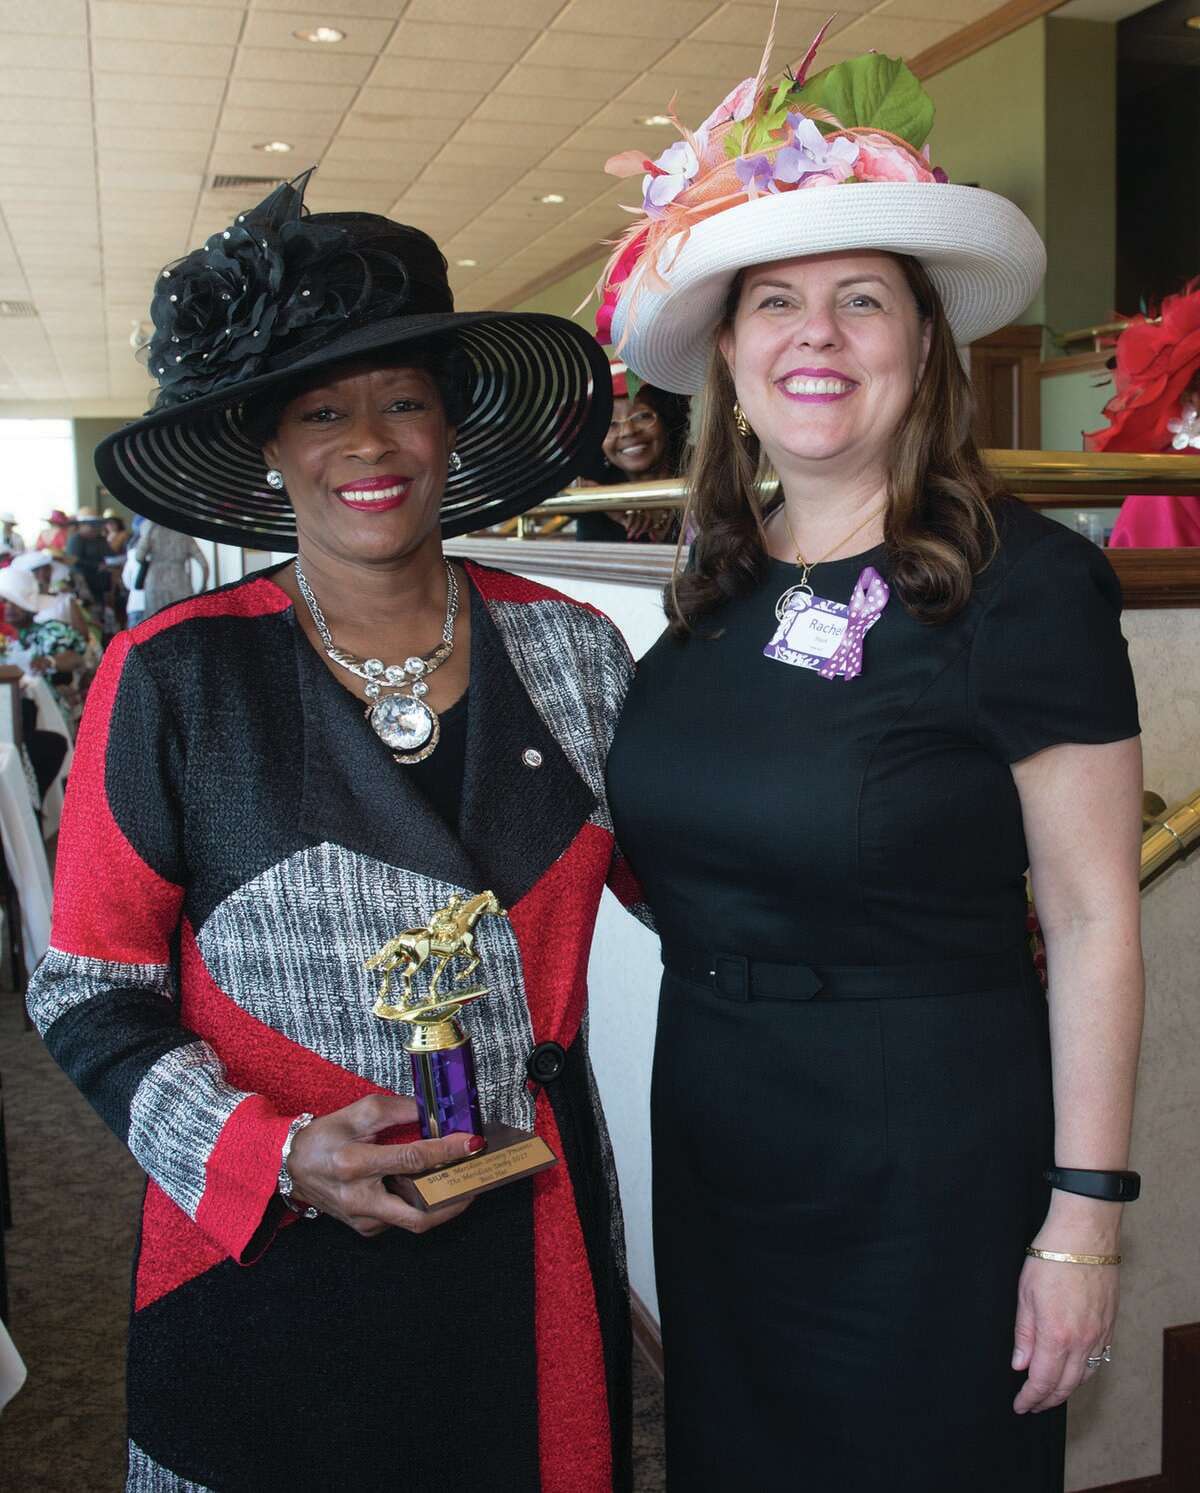 Mary Trice’s (left) ensemble showcased SIUE pride with red and black accents, and earned the best hat award. She stands with Vice Chancellor for University Advancement and CEO of the SIUE Foundation Rachel Stack.